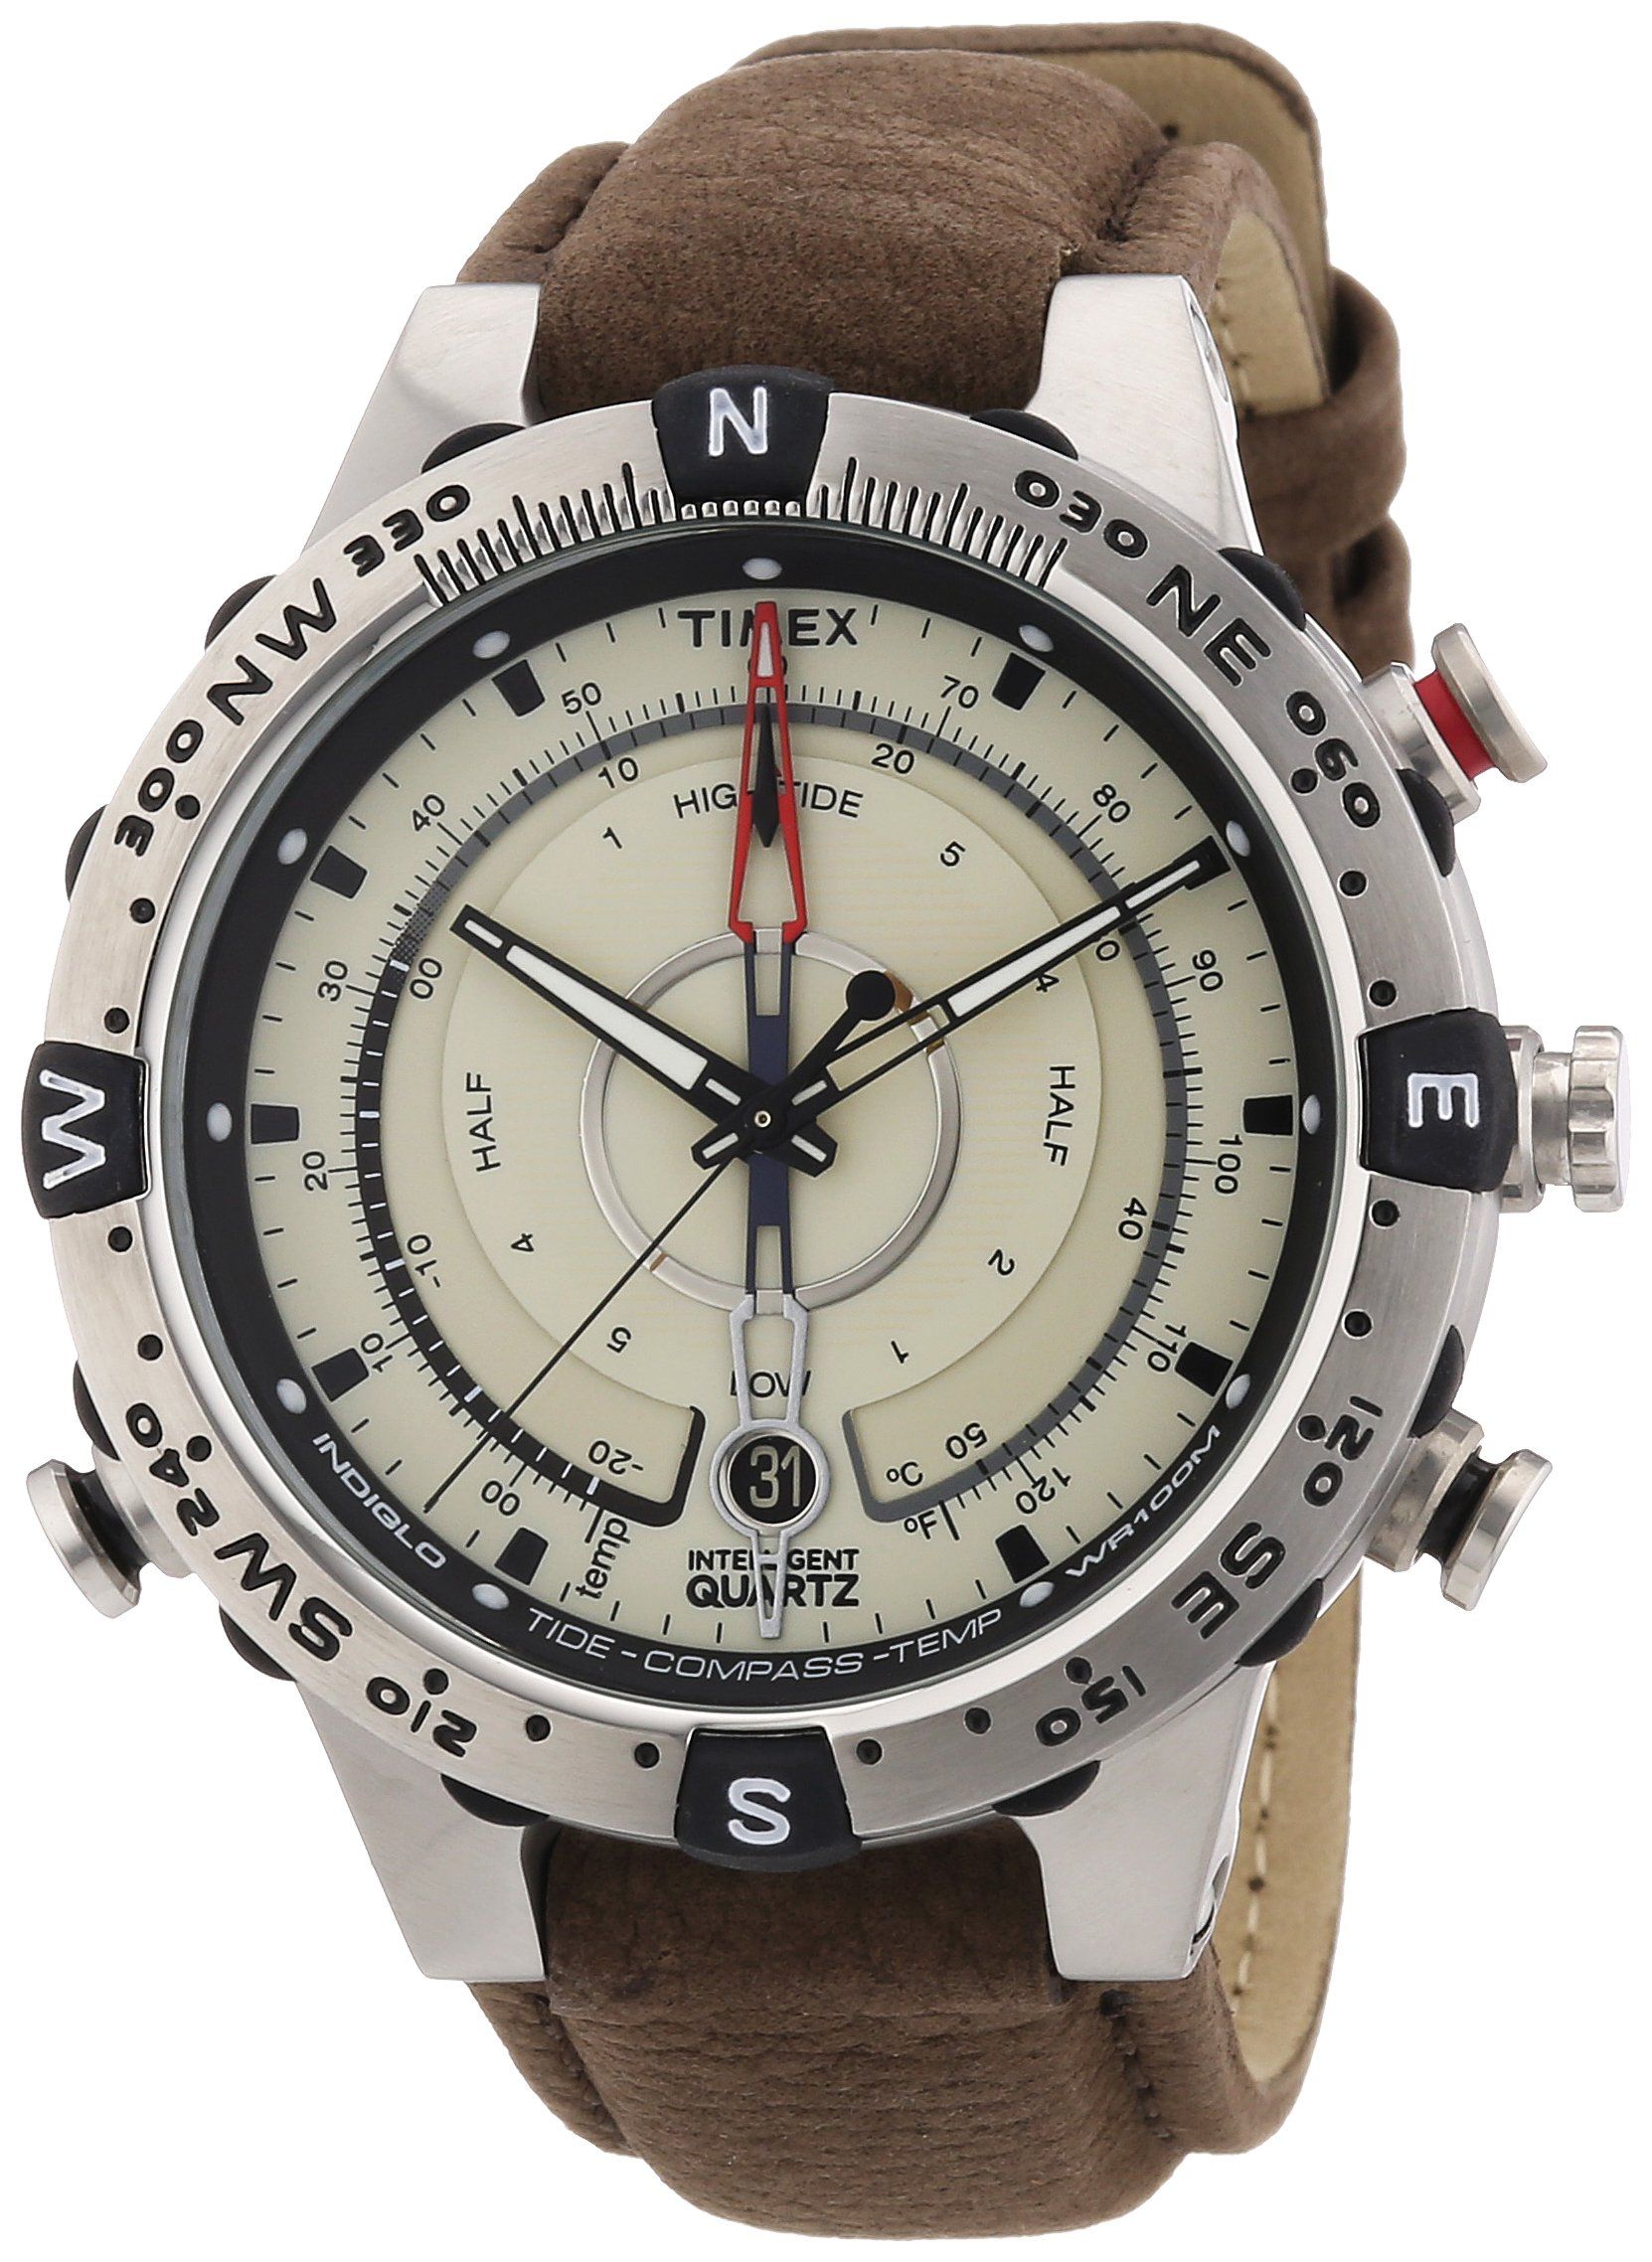 Timex Expedition E-Tide Temp Compass Watch T2N721: Timex: Amazon.co ...